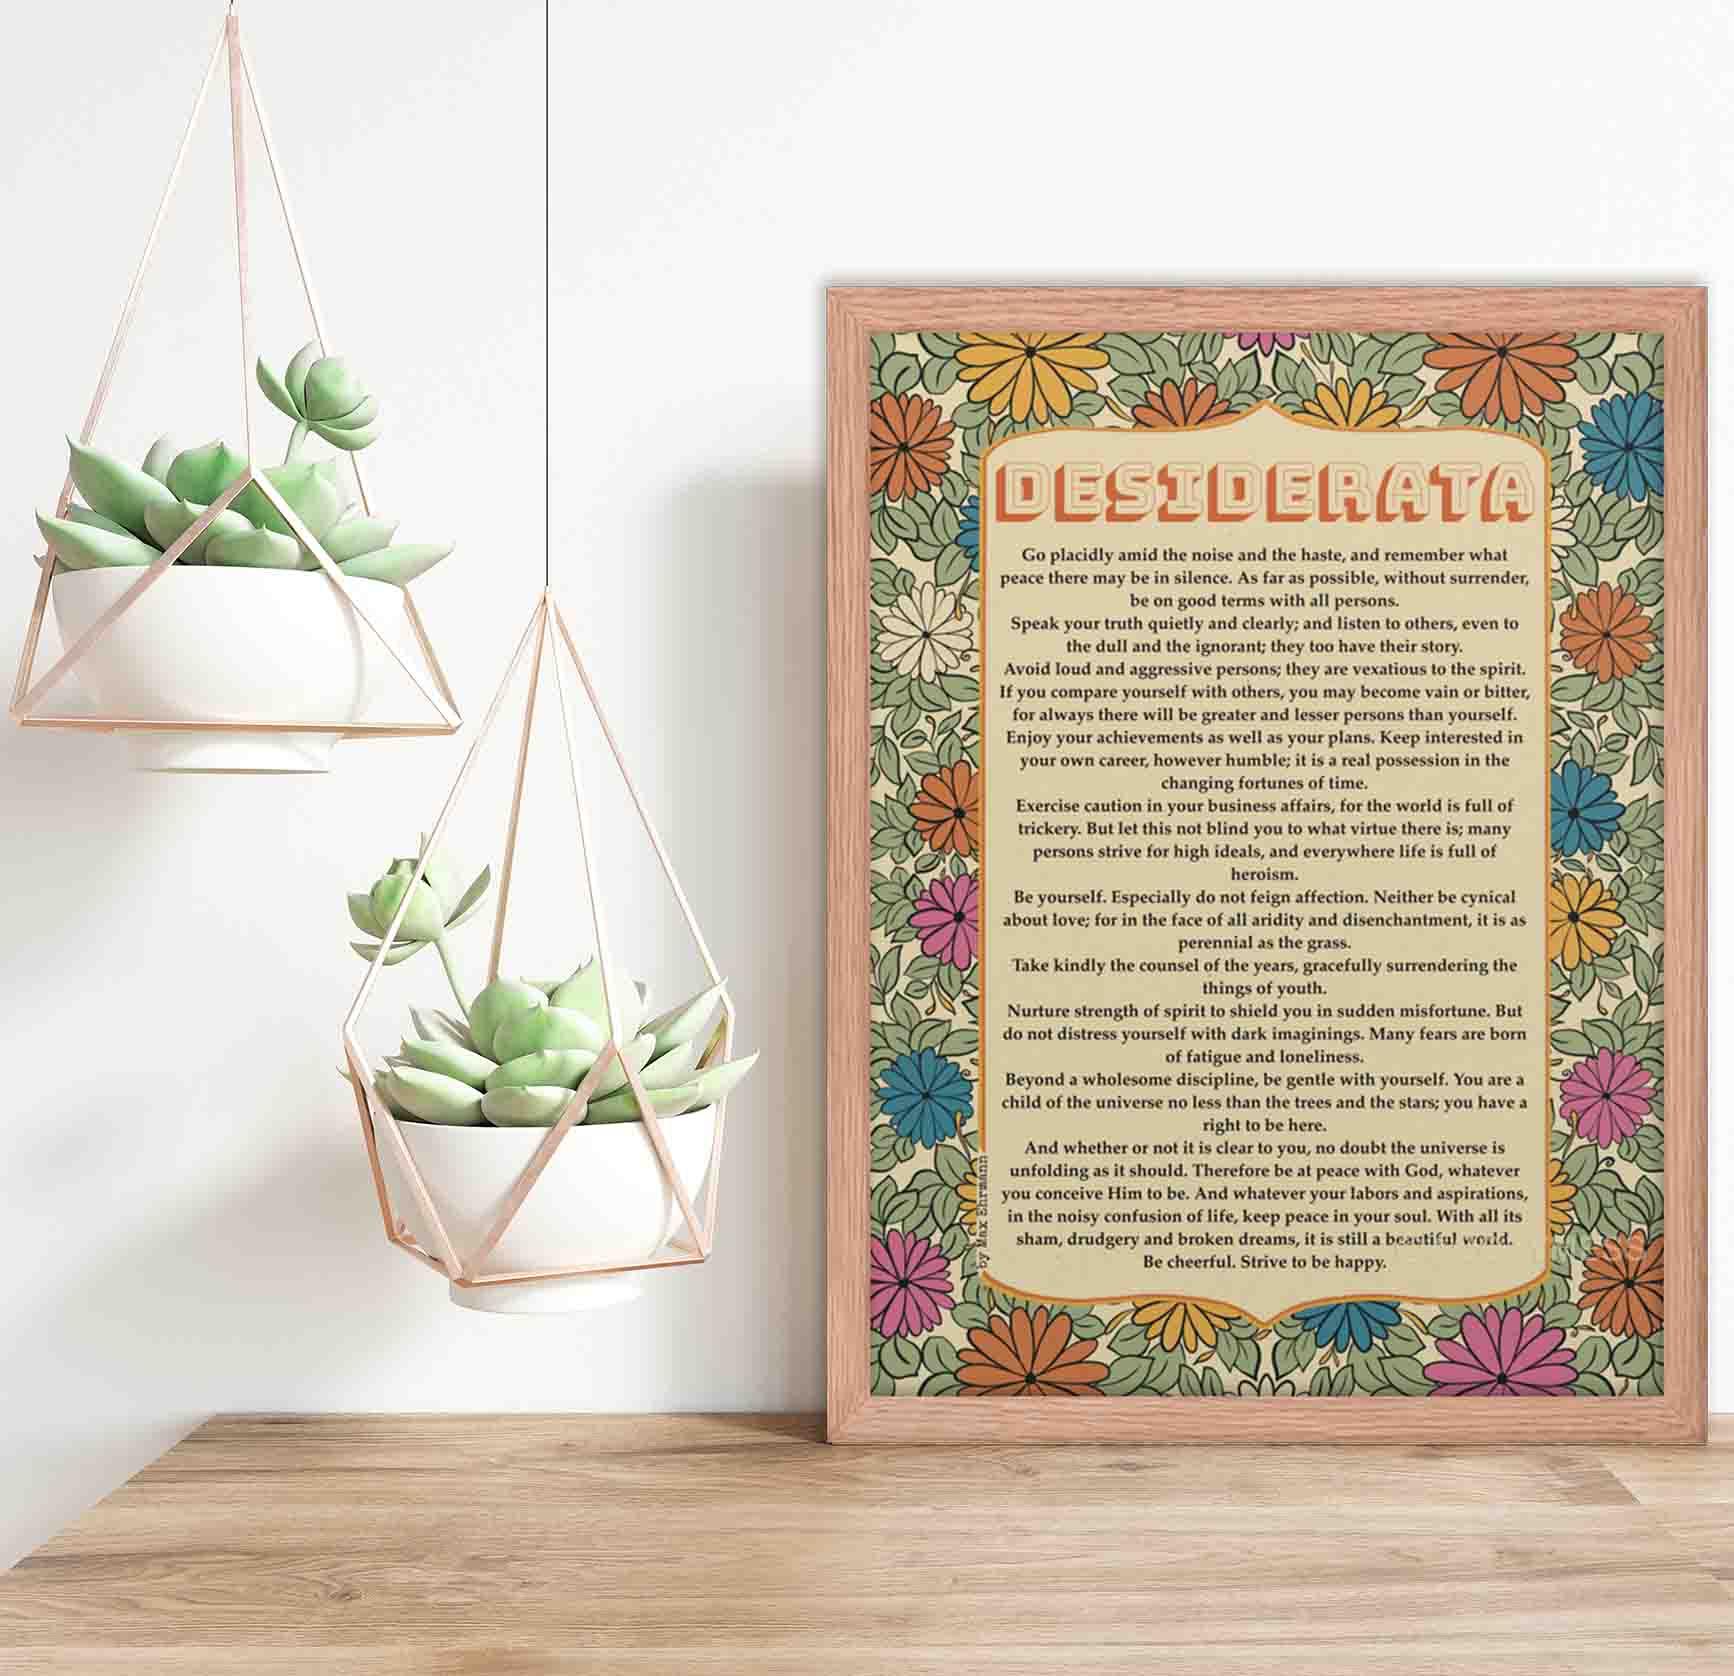 Desiderata poem Print with floral design in soothing colors in oak wood frame